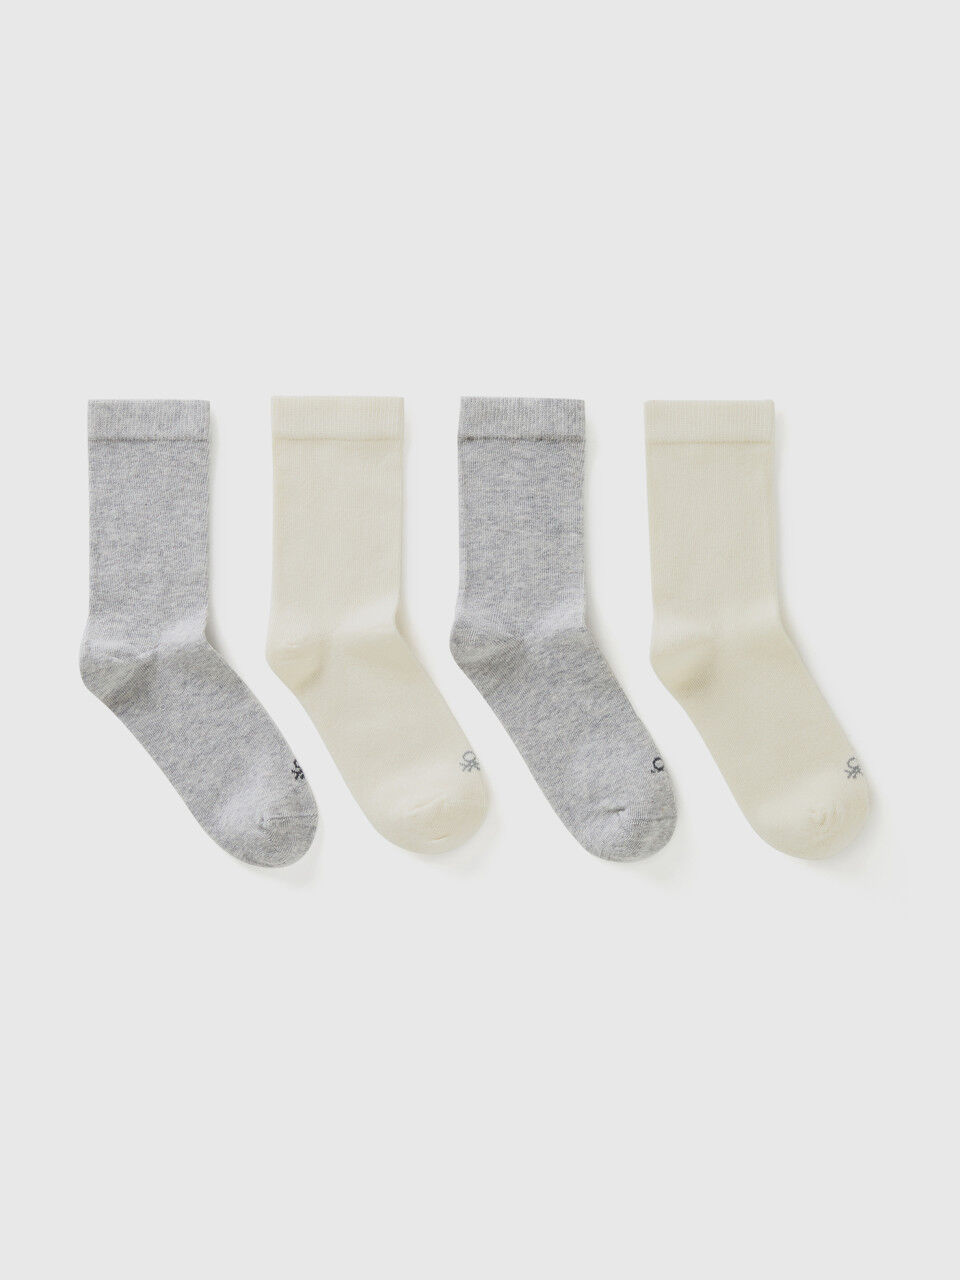 Four pairs of white and gray socks